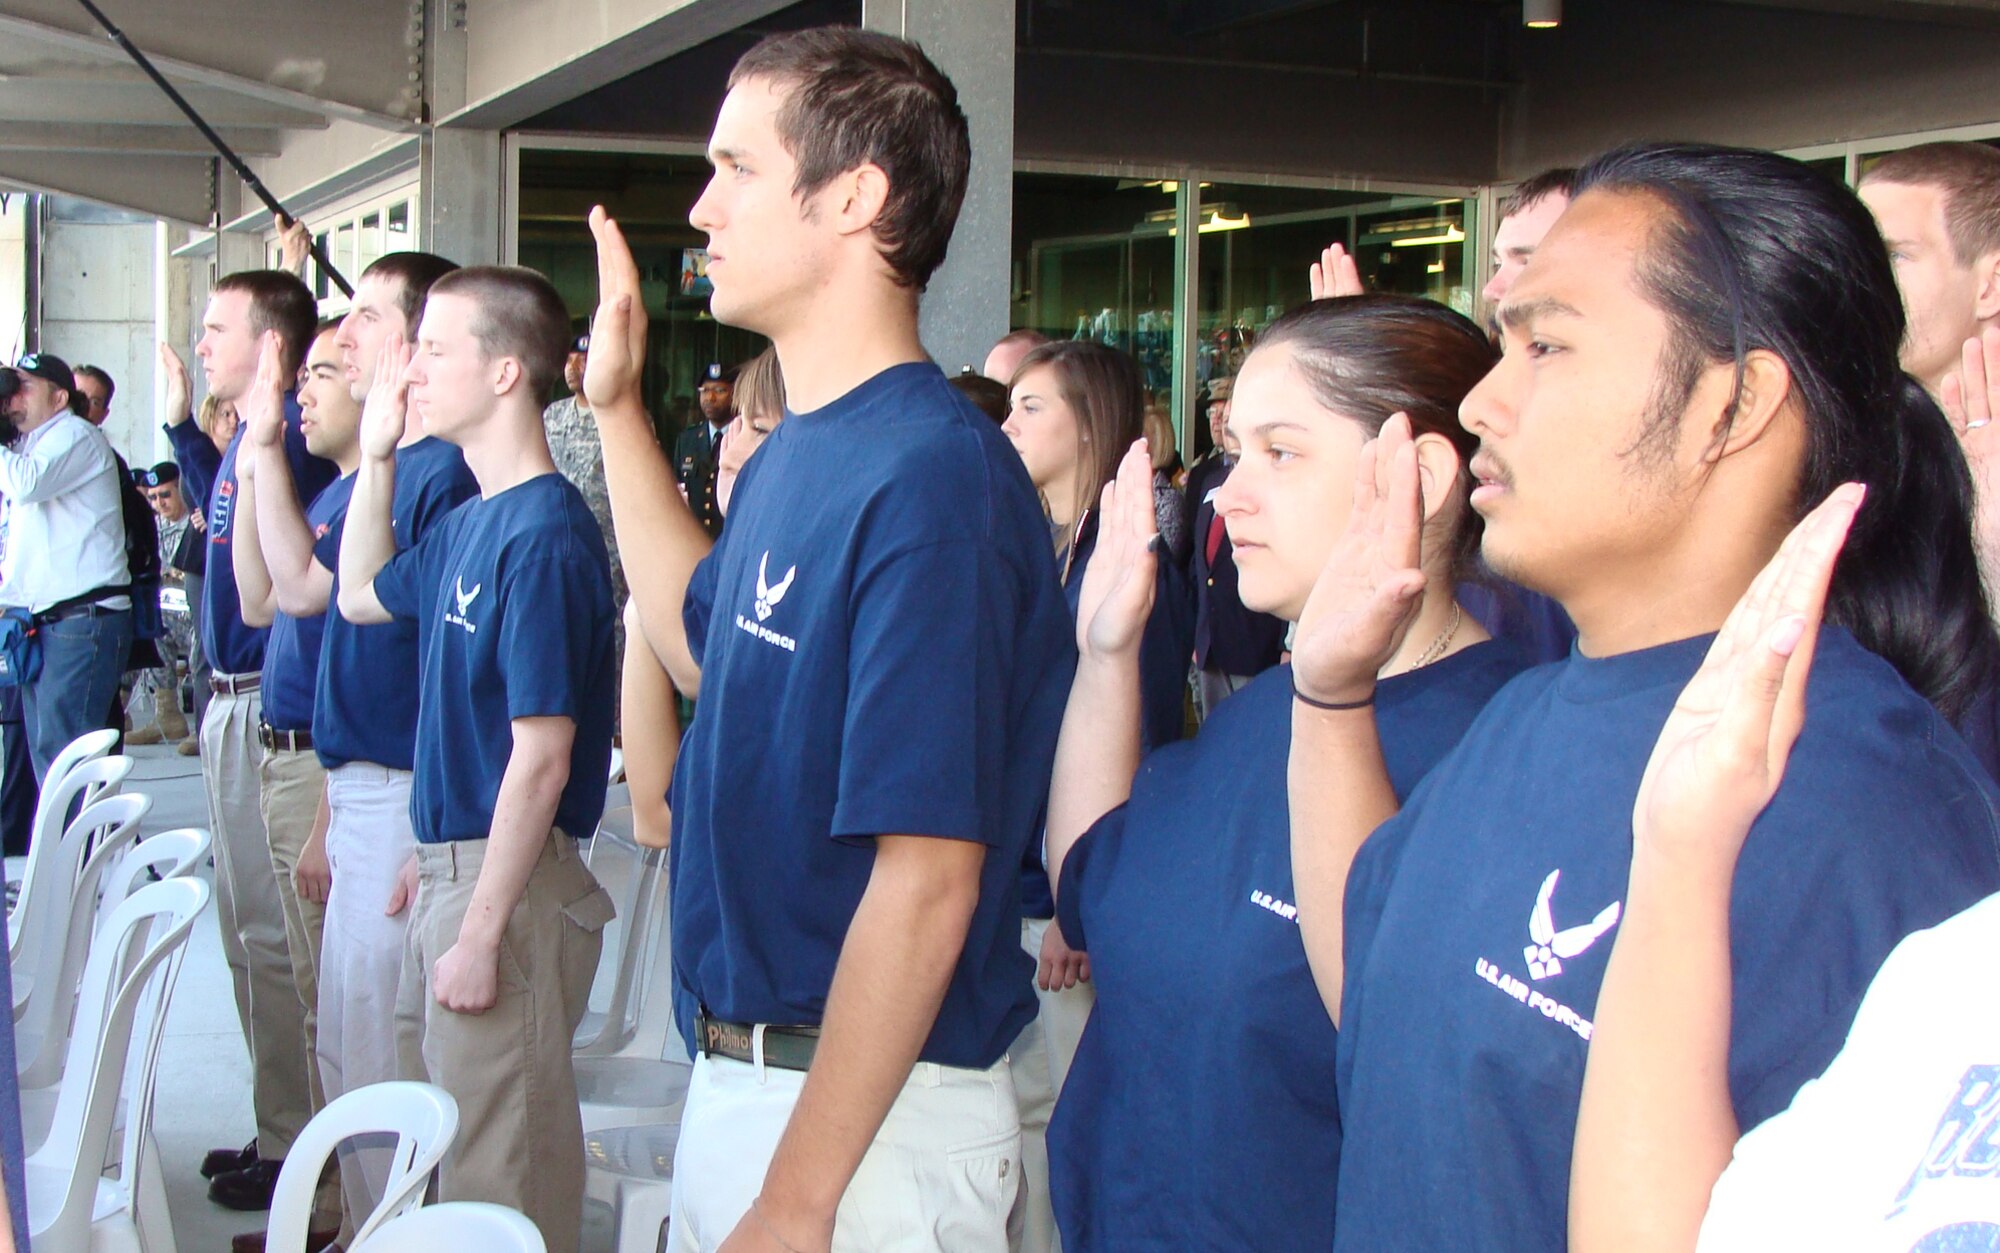 Six members of the Air Force delayed entry program recite the oath of enlistment administered by Indiana Senator Richard Lugar during a ceremony May 17 at the Indianapolis Motor Speedway. The speedway recognizes the contributions of military men and women annually during Armed Forces Day weekend. The Indianapolis 500 May 24 features the debut of an Air Force-themed Indy car driven by rookie Rafael Matos, who qualified 12th and starts from the fourth row. (U.S. Air Force photo/Daniel Elkins)